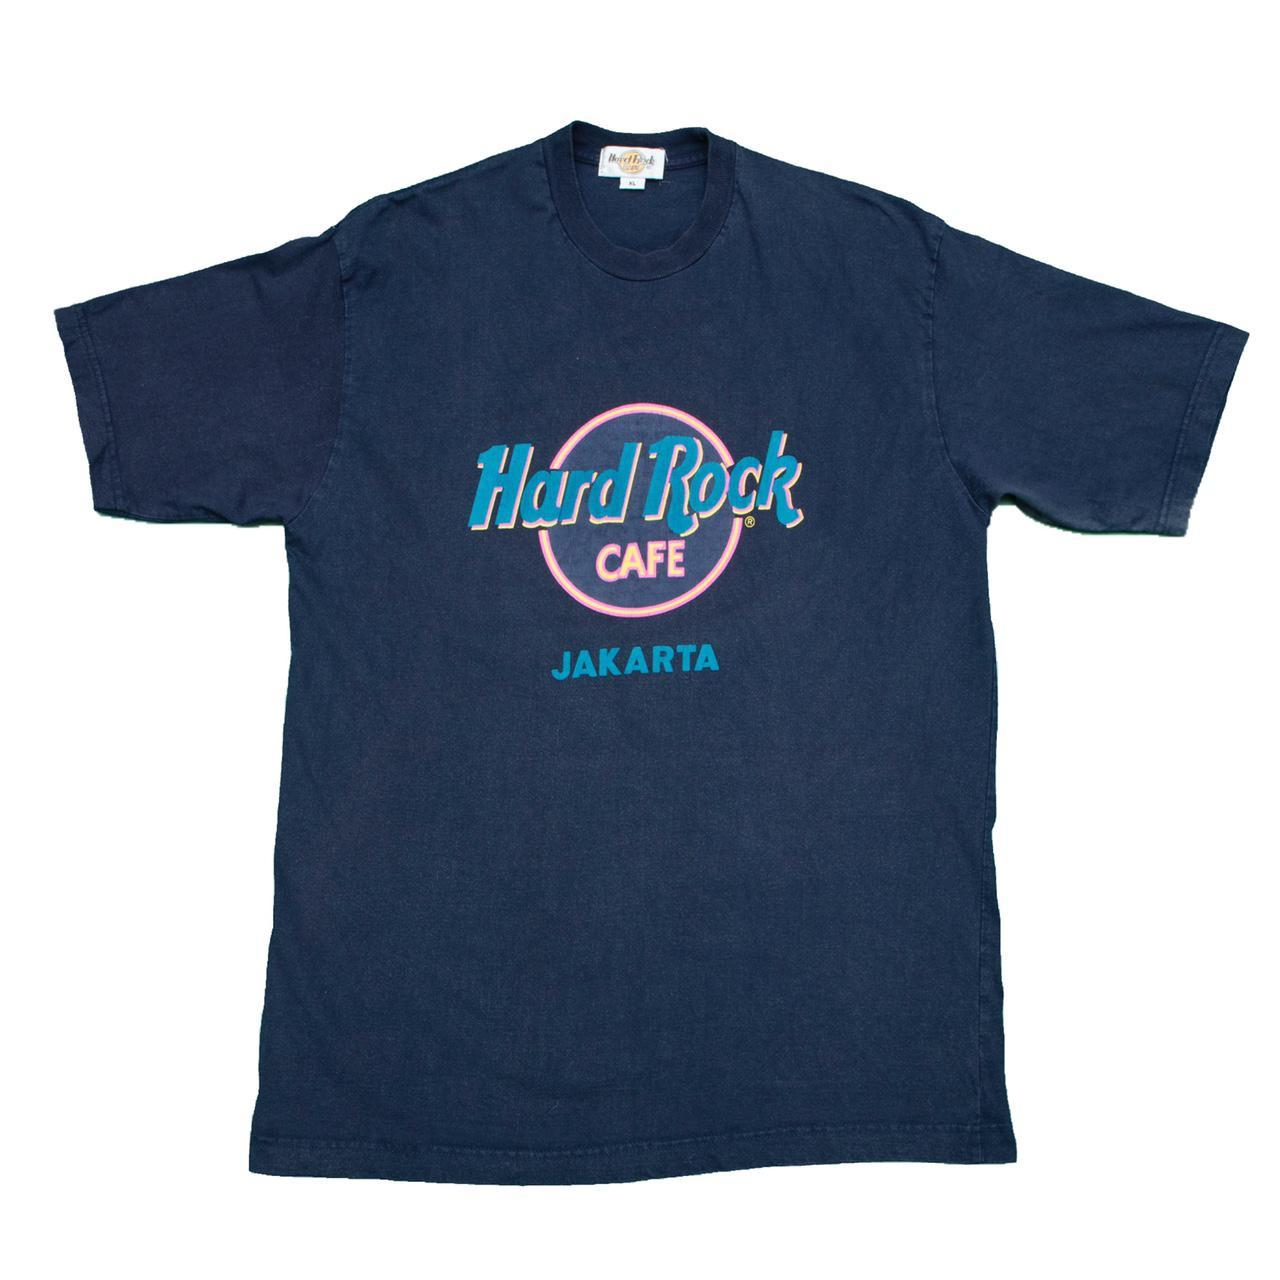 Men's Blue and Pink T-shirt